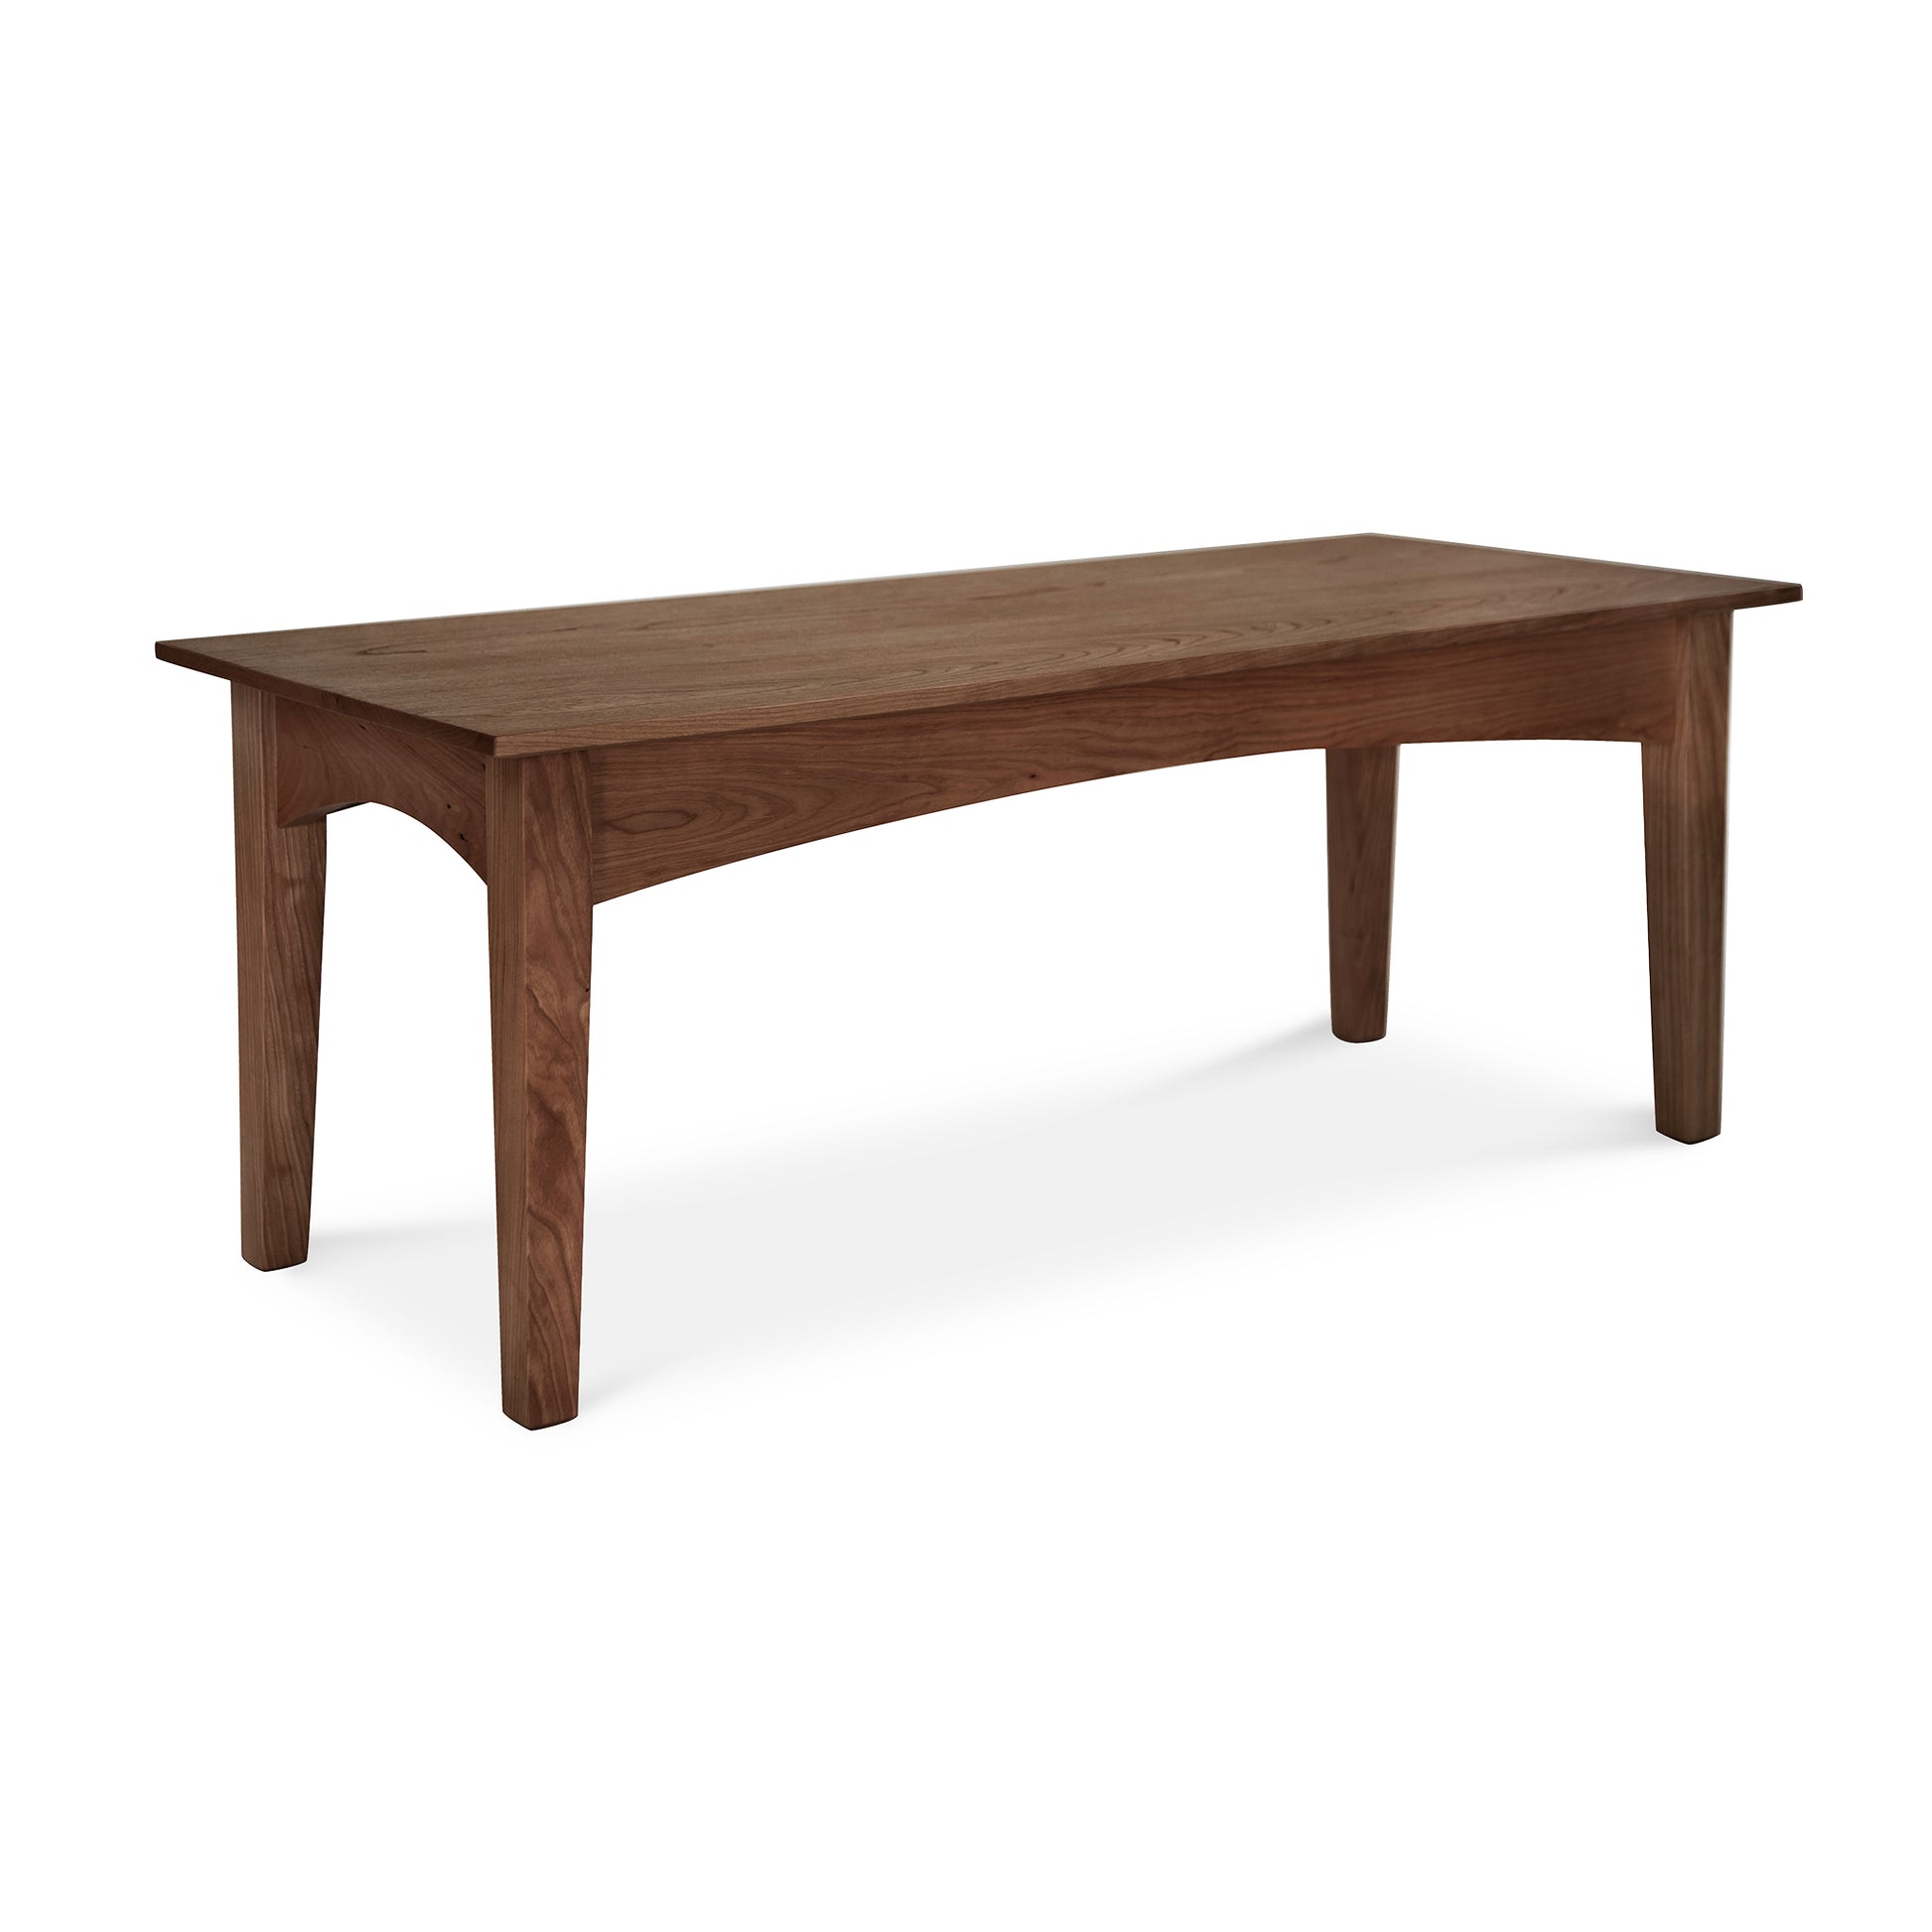 A simple, rectangular American Shaker Coffee Table by Maple Corner Woodworks with four sturdy legs, isolated on a white background. The coffee table is made of solid hardwood, featuring a rich, brown wood with visible grain patterns.